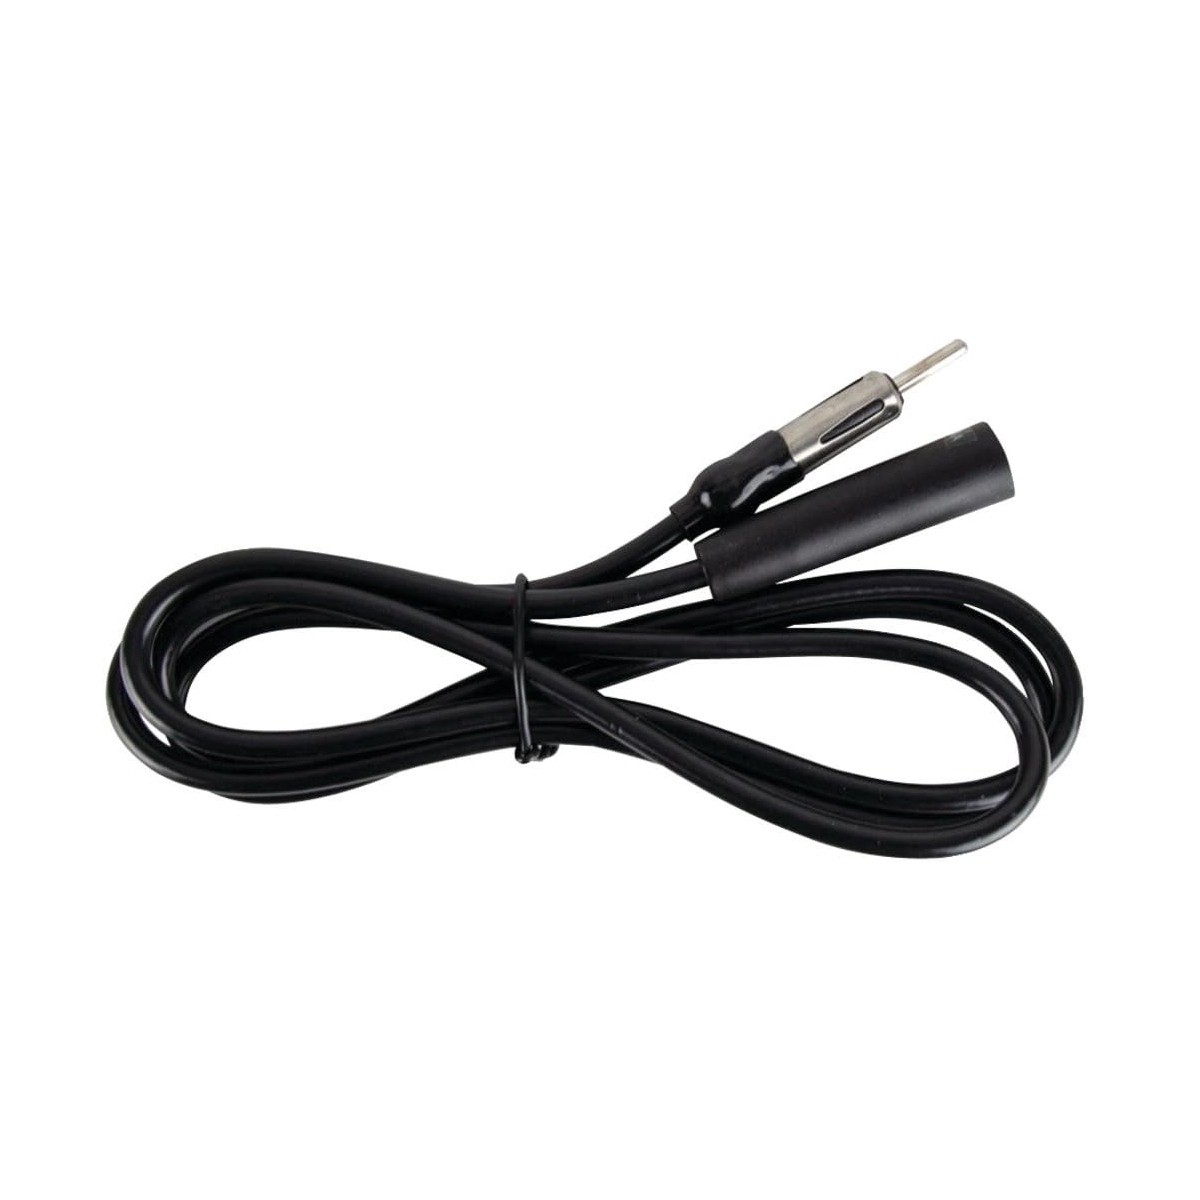 Raptor 48 Inch Extension Cable with Capacitator